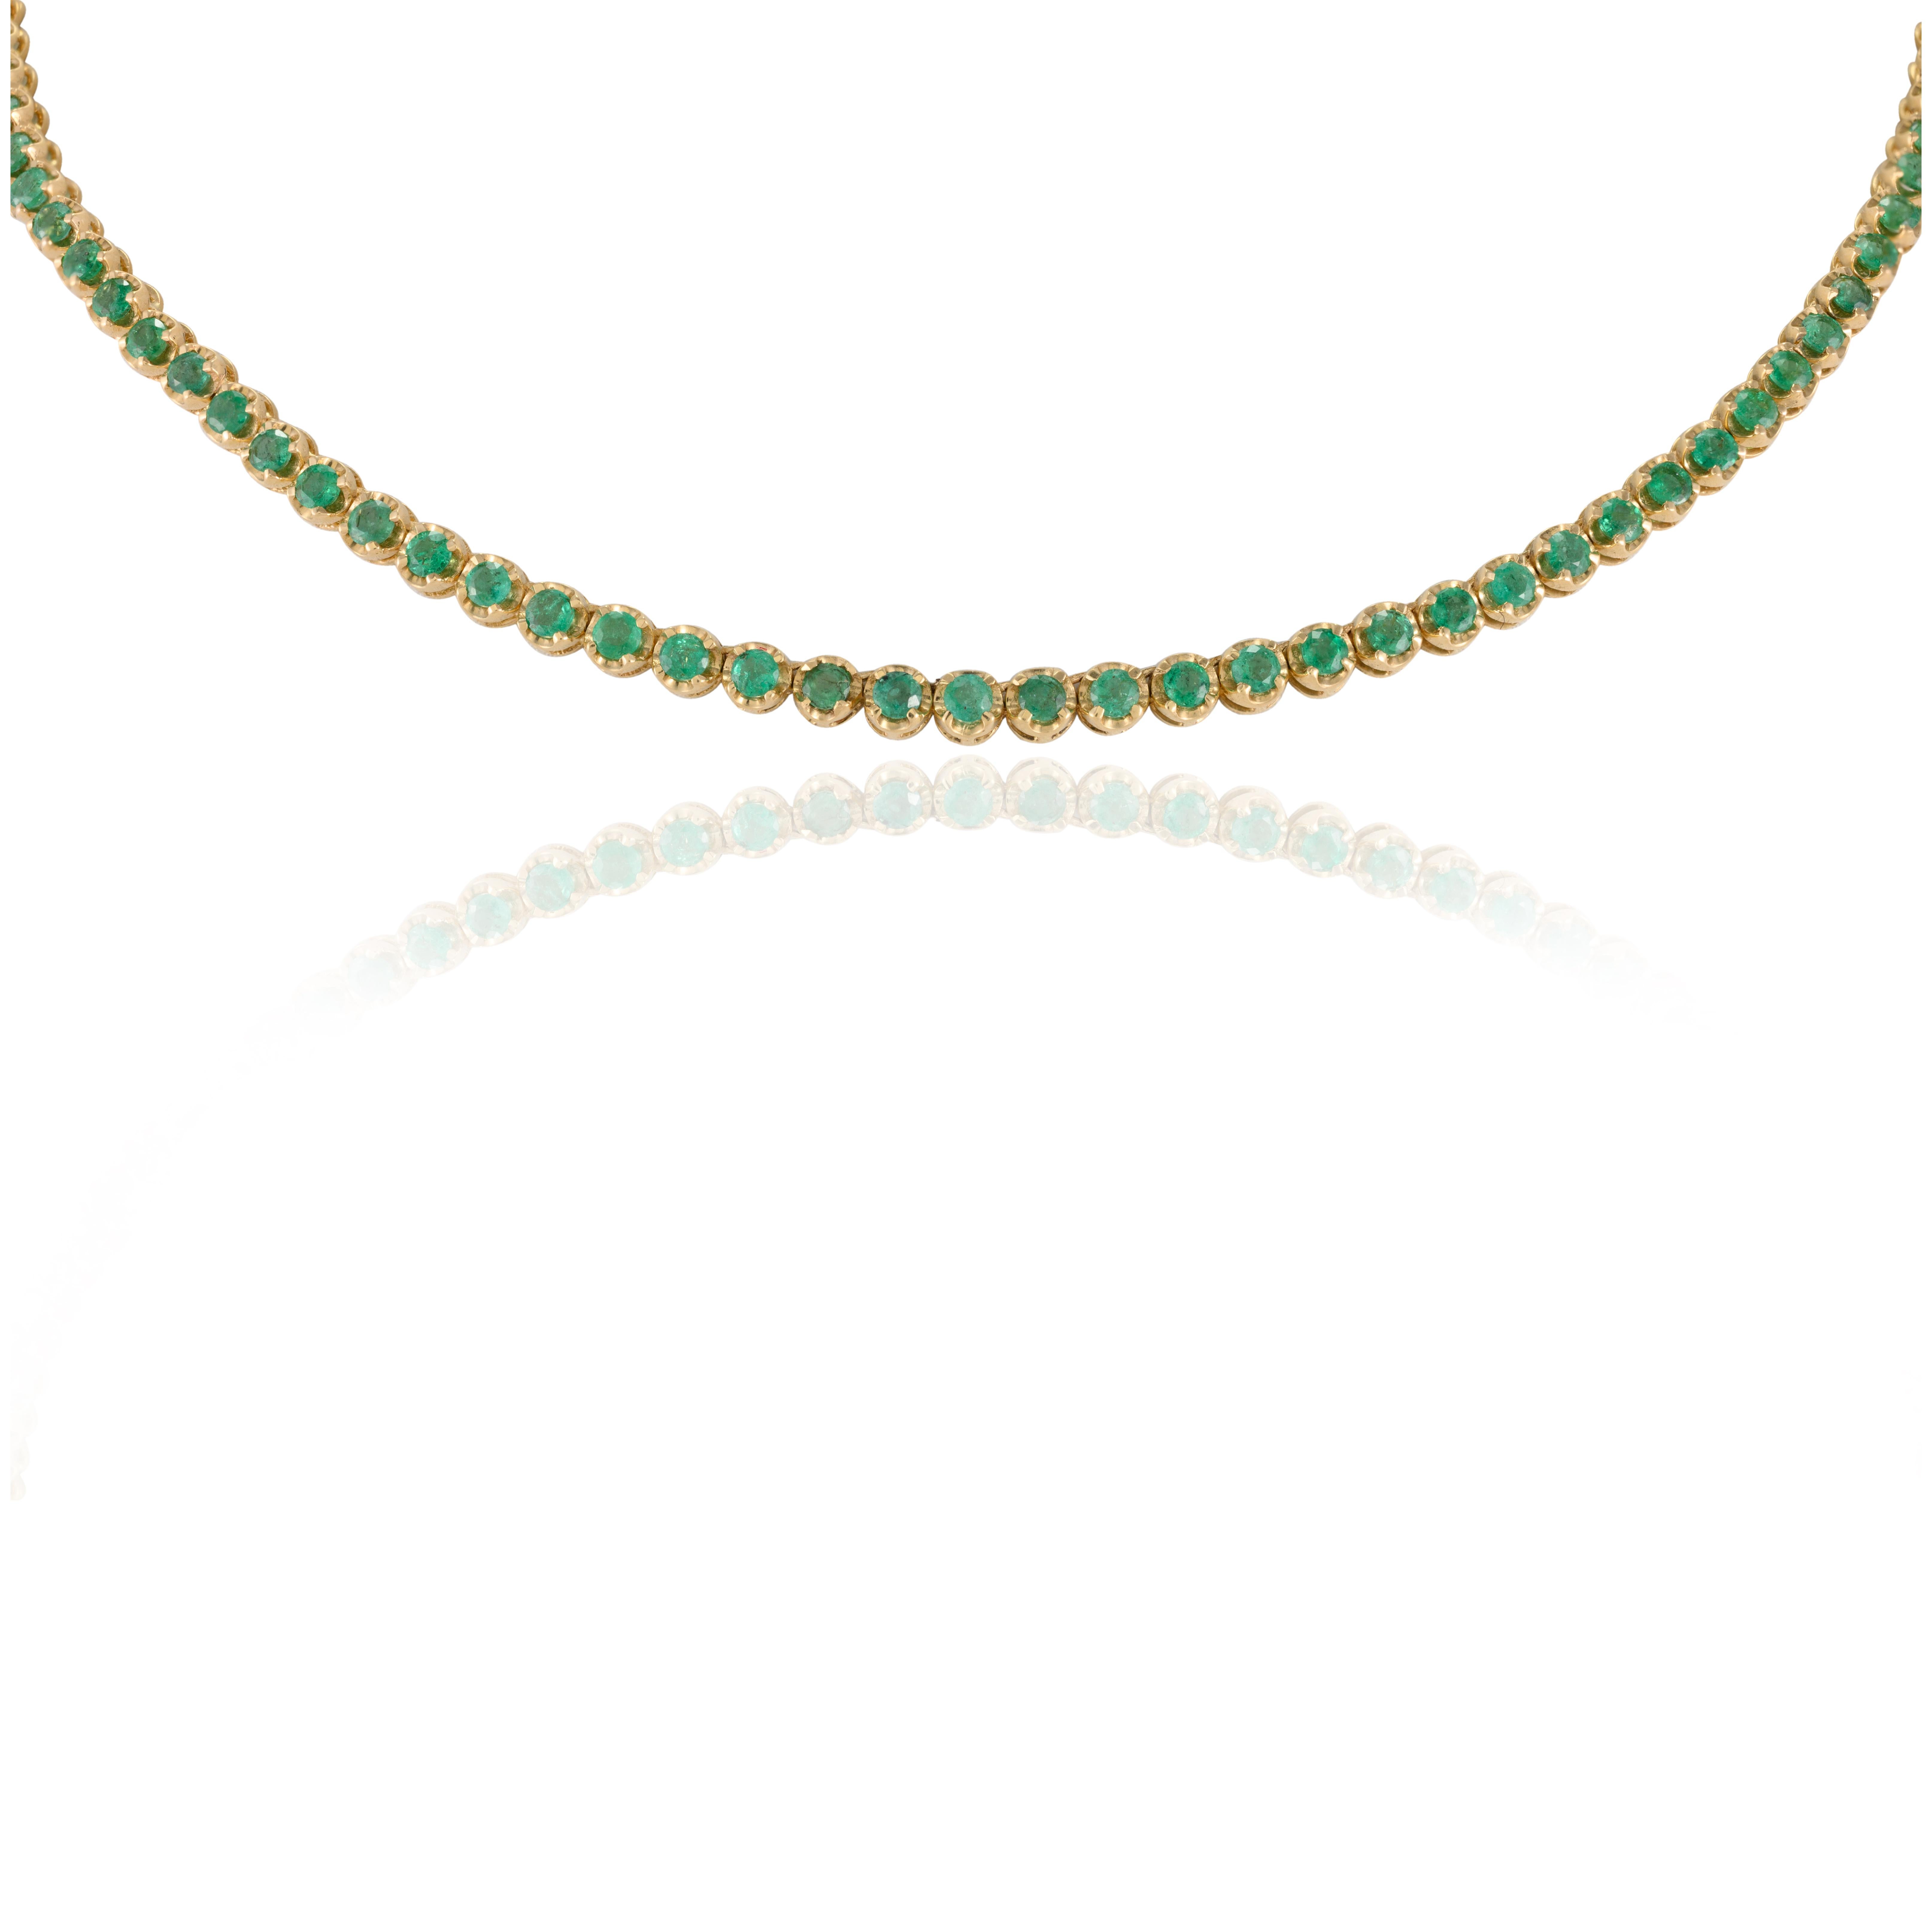 Rare 7.16 CTW Round Cut Emerald Tennis Necklace Gift for Grandma in 18K Gold studded with round cut emeralds. This stunning piece of jewelry instantly elevates a casual look or dressy outfit. 
Emerald enhances intellectual capacity of the